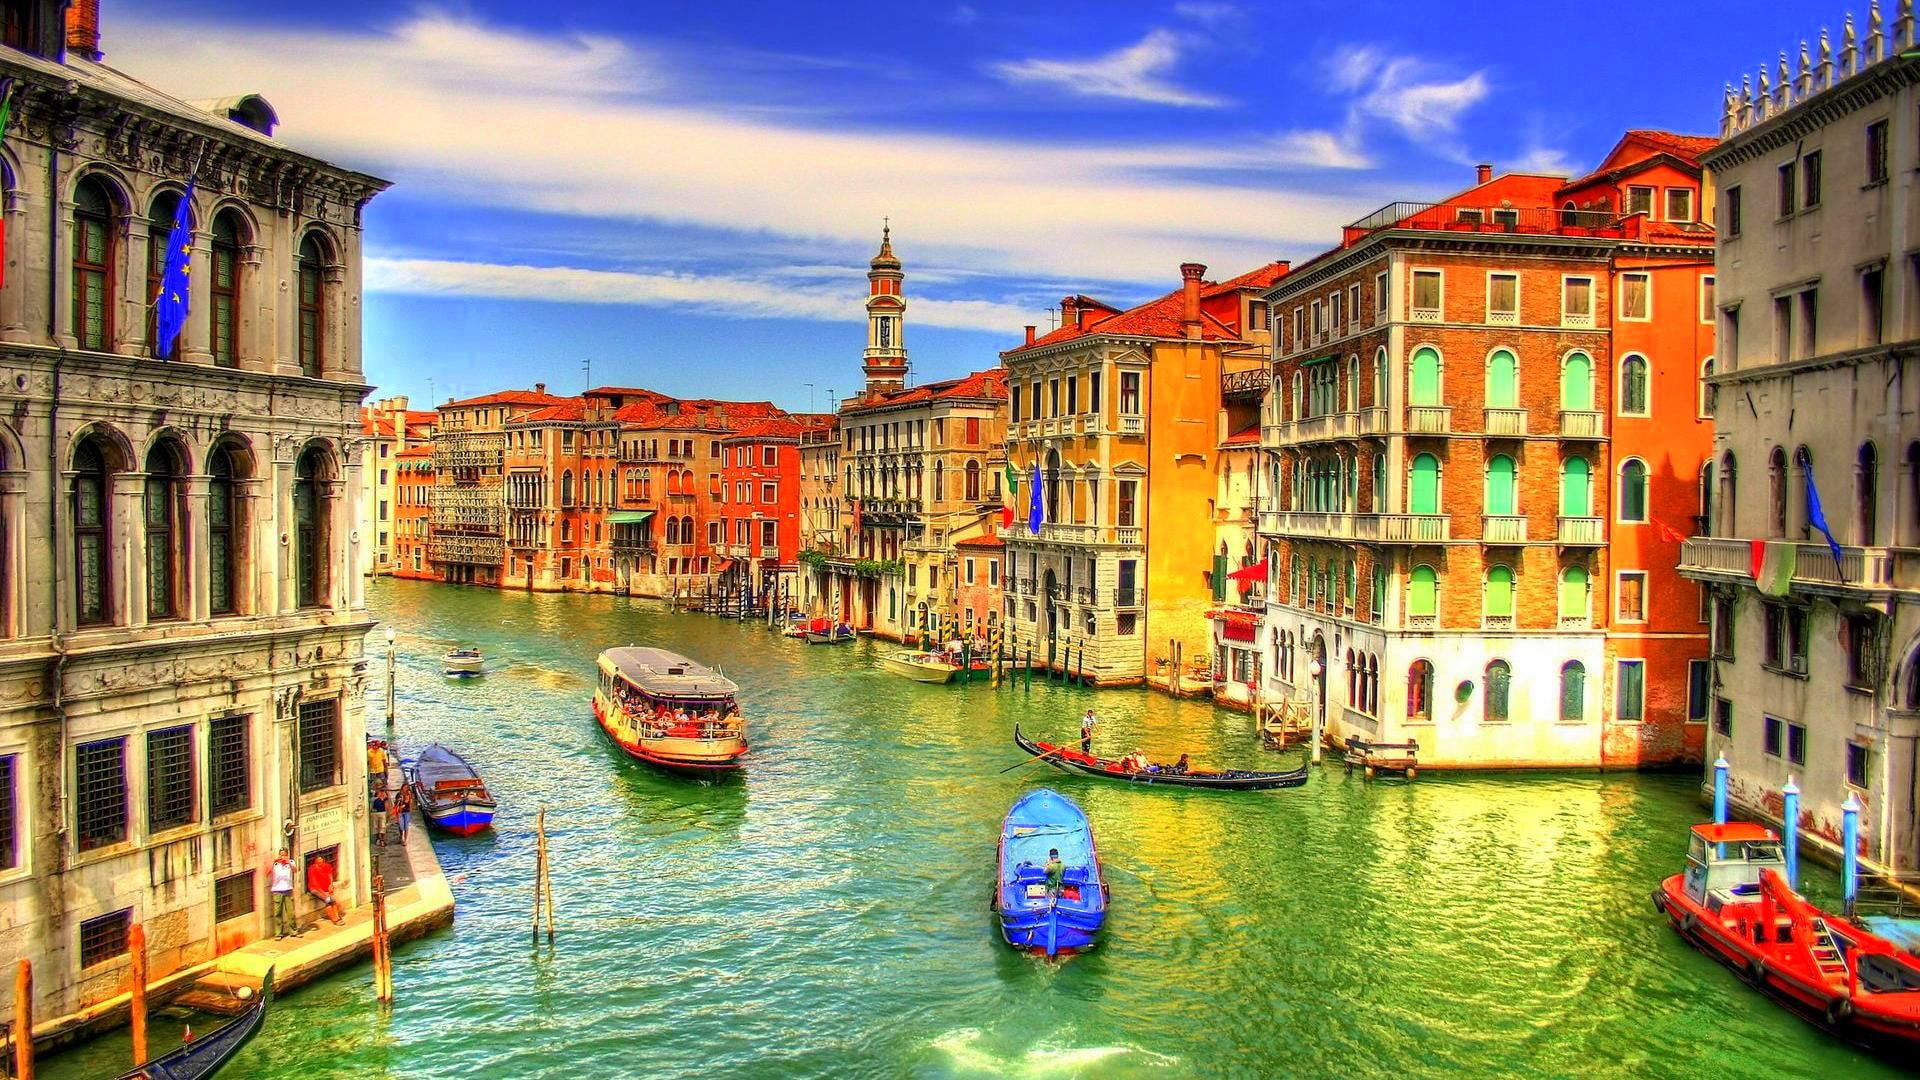 Wallpaper canal, architecture, tourism, water, europe, river, building